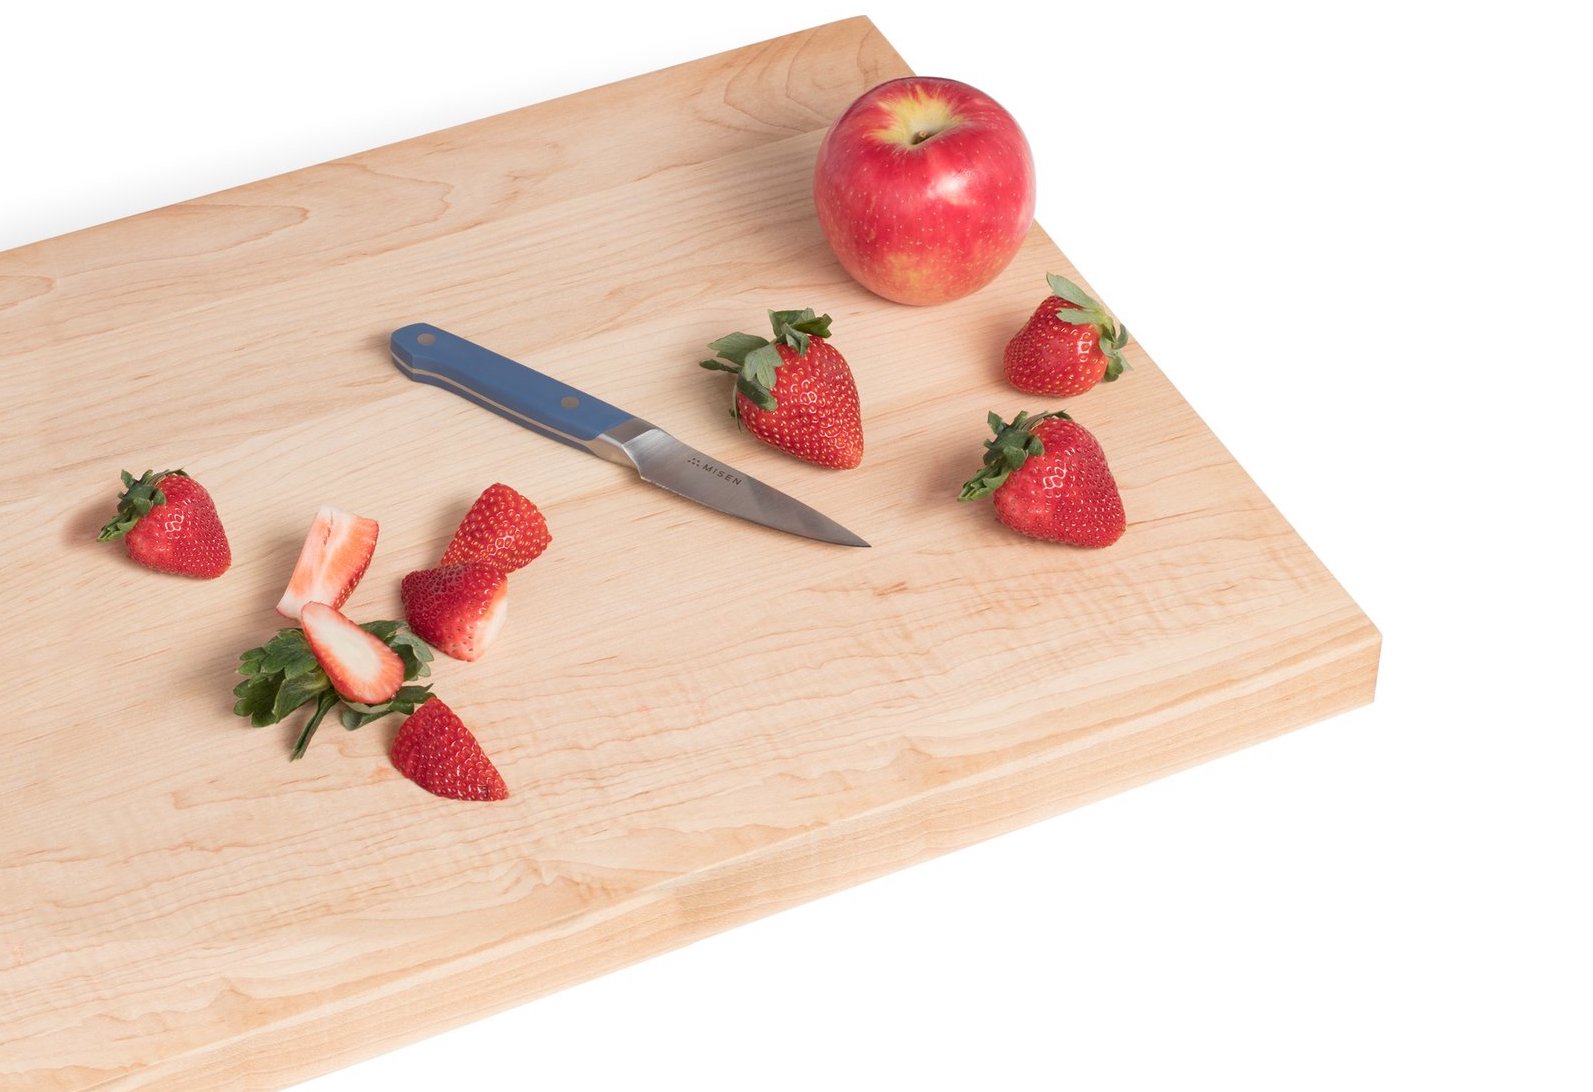 Paring knives: a Misen paring knife on a cutting board with strawberries